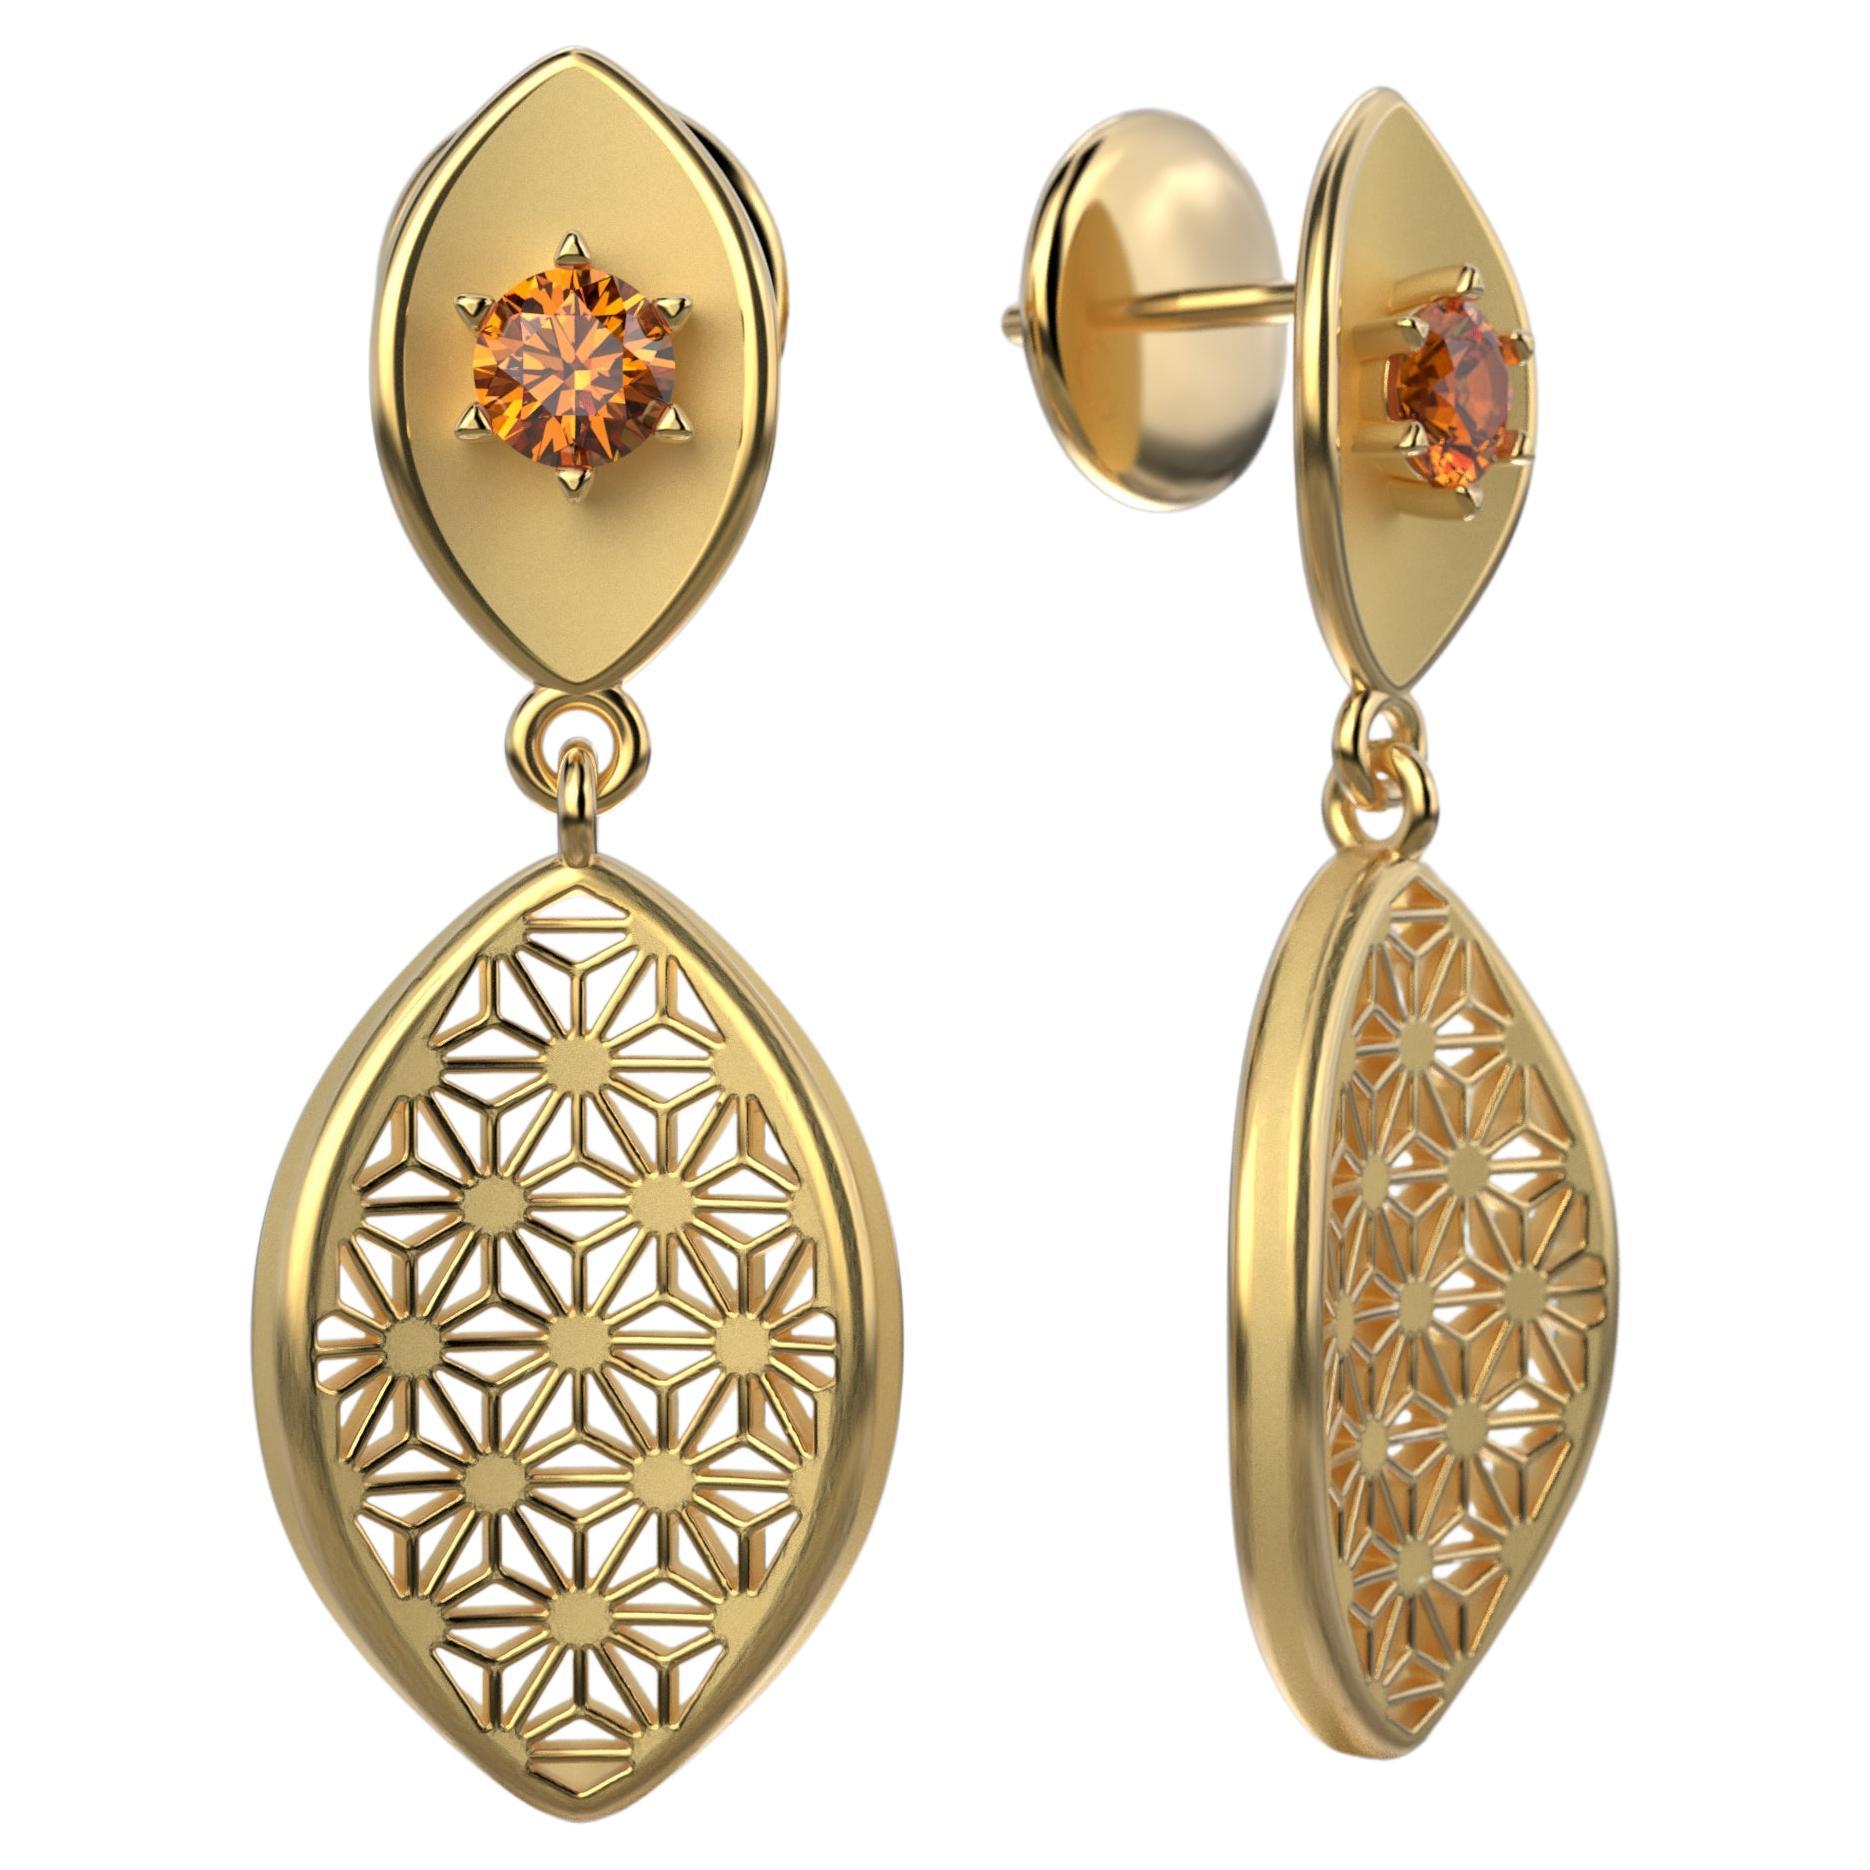 Made to order Italian 14k Gold Earrings.
Discover exquisite Italian Gold Earrings made in Italy. Our collection features stunning Hessonite Mandarin Garnet Earrings, adorned with Sashiko Japanese Pattern for a unique touch. Explore our curated